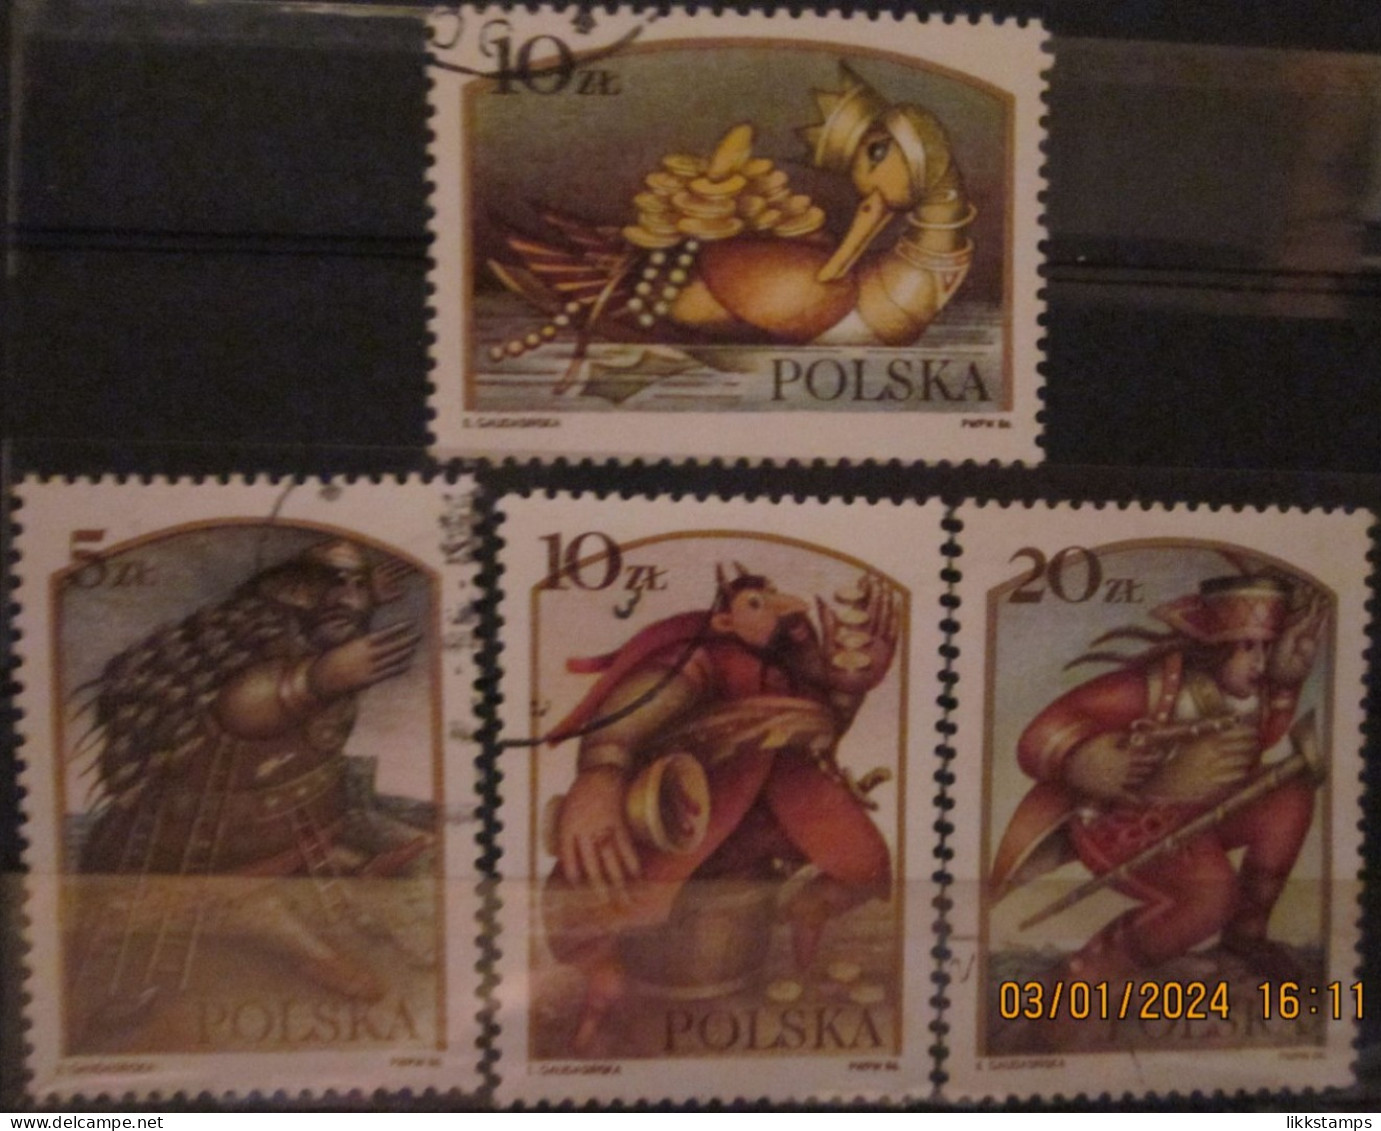 POLAND ~ 1986 ~ S.G. NUMBERS S.G. 3067 - 3070. ~ FOLK TALES ~ VFU #03535 - Used Stamps